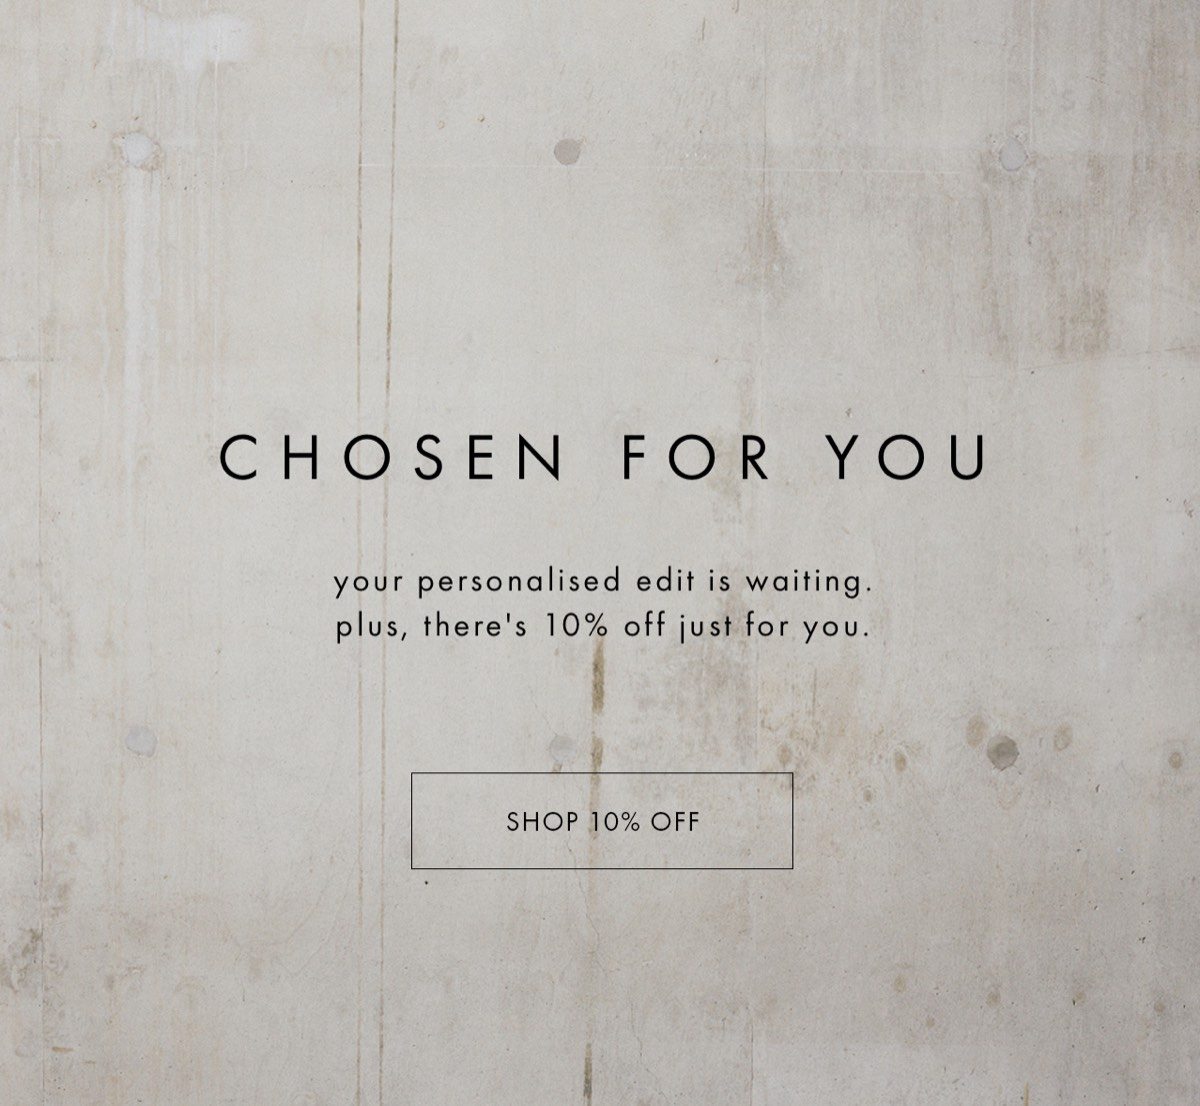 chosen for you your personalised edit is waiting. plus, there's 10% off just for you. shop 10% off